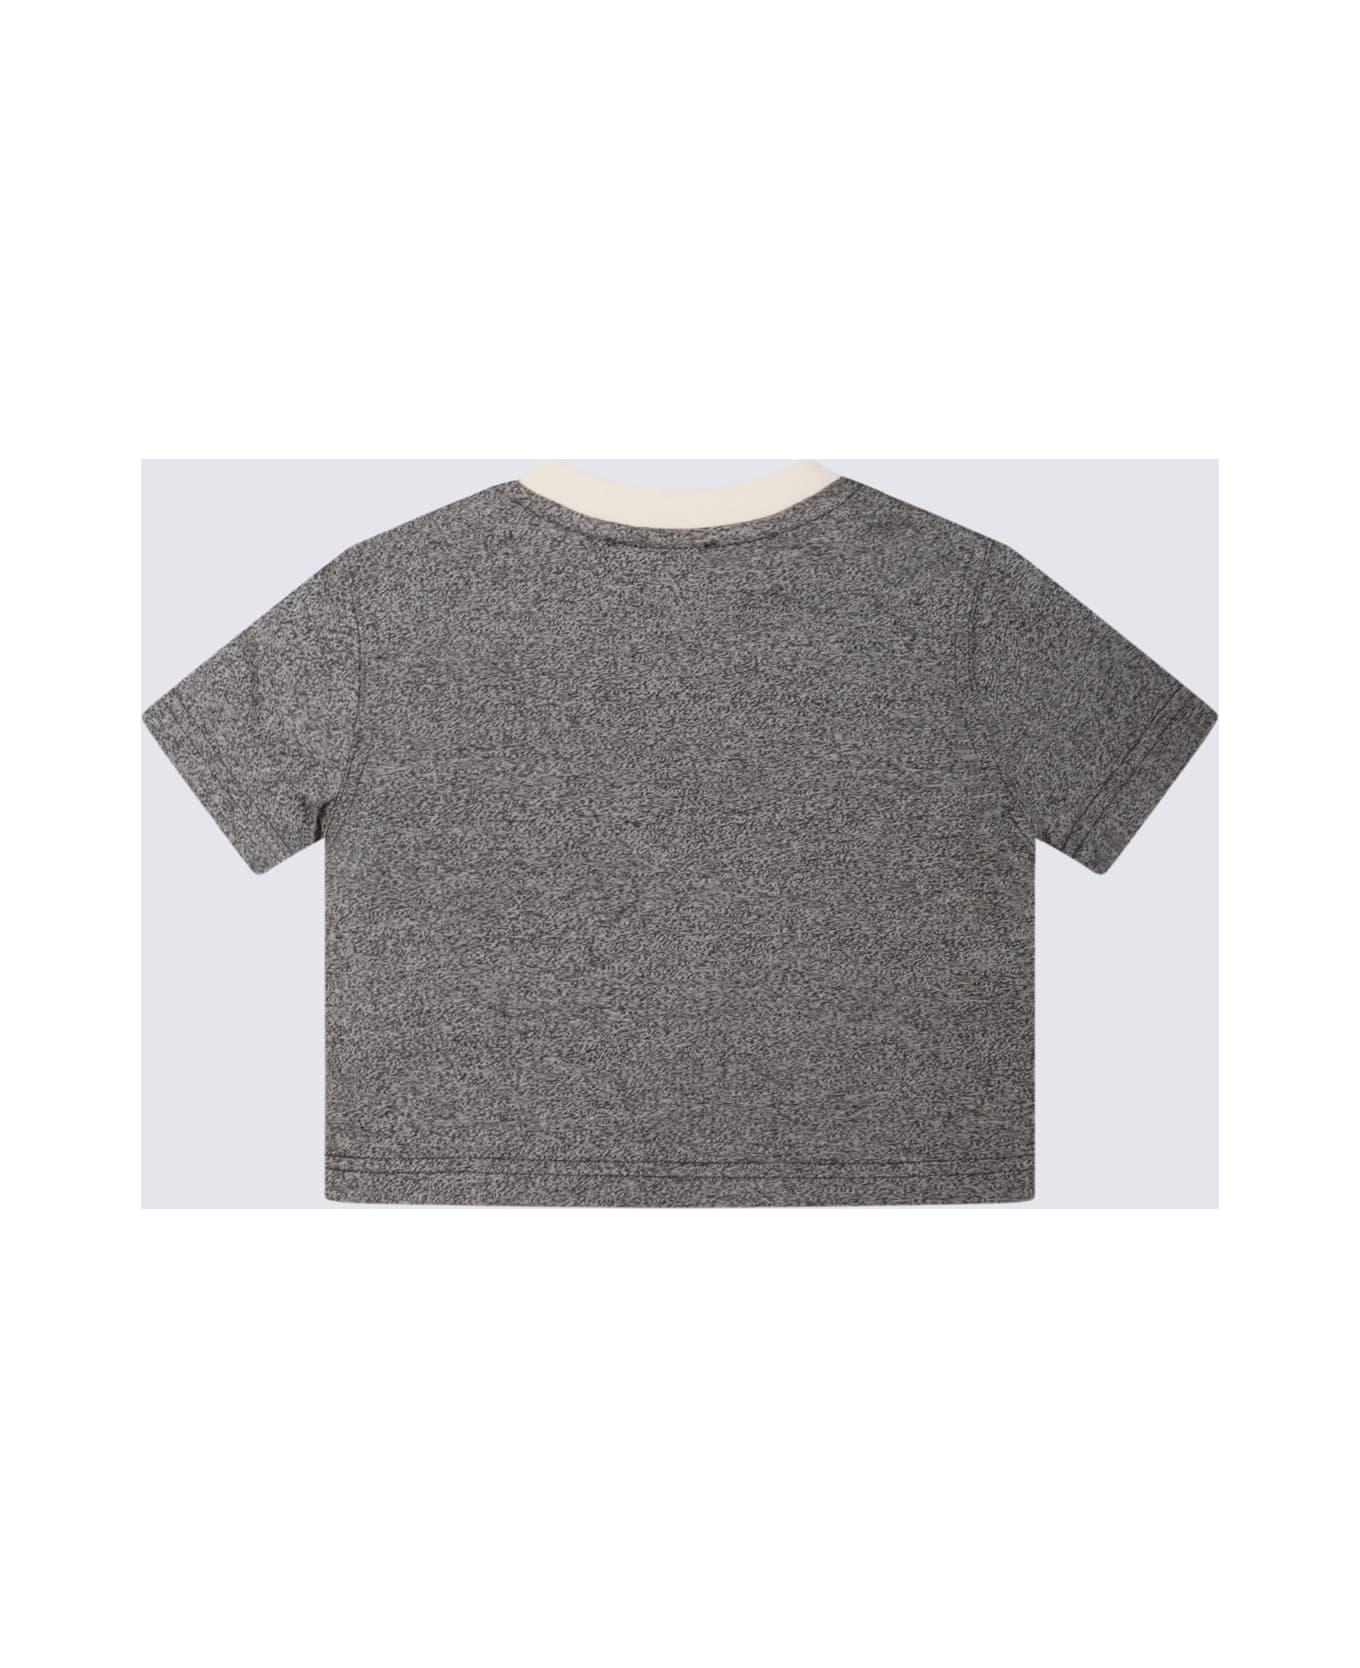 Burberry Grey And White Cotton T-shirt - CHARCOAL GREY MELANG